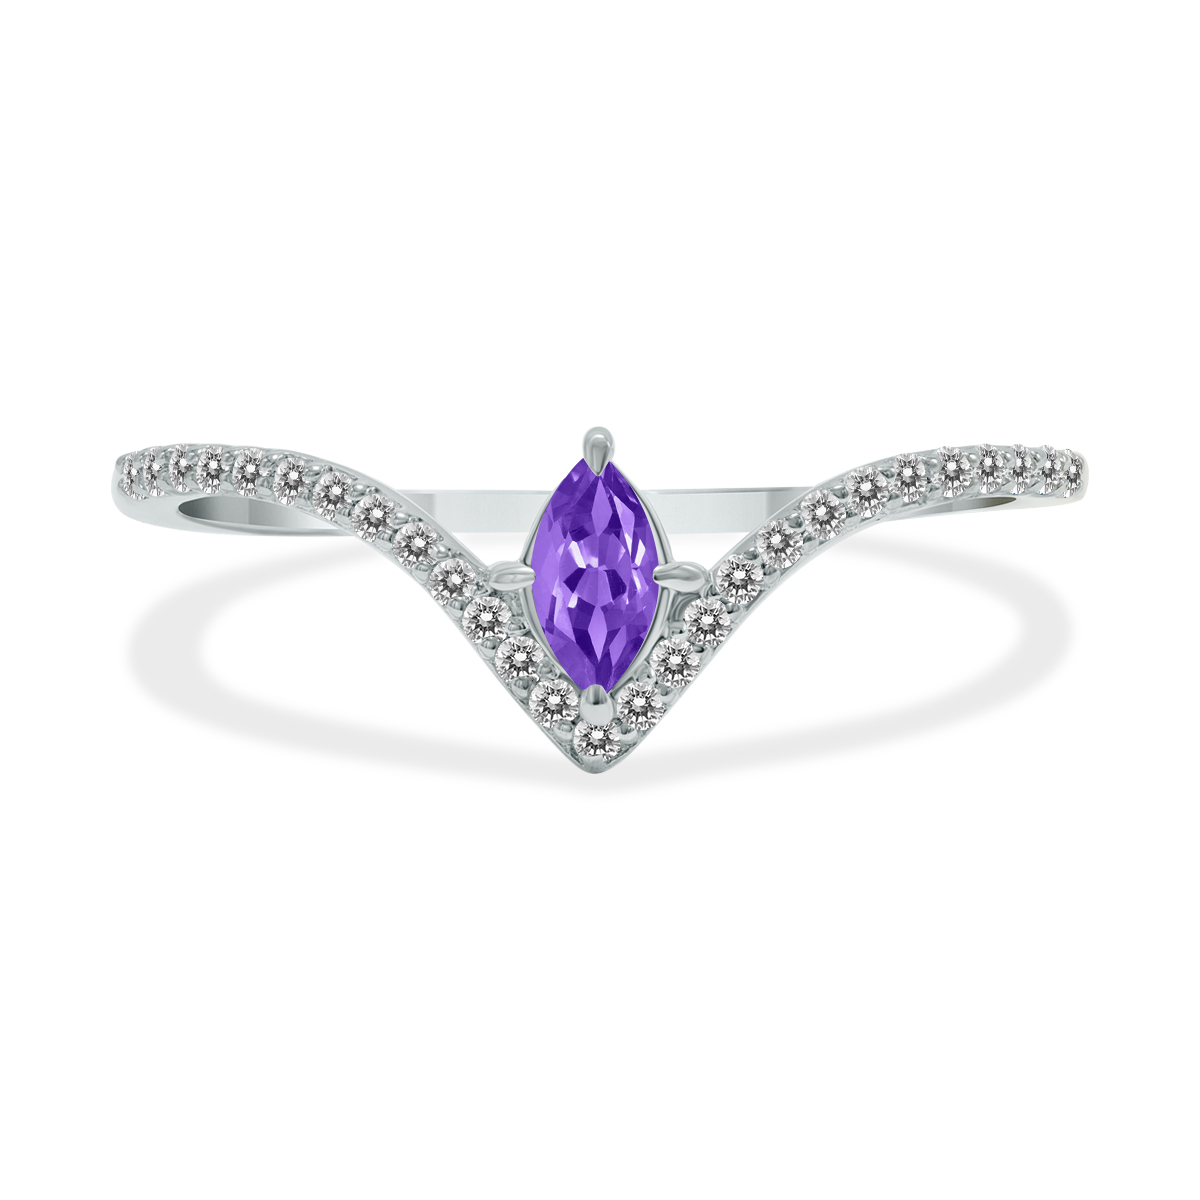 Image of 1/4 Carat TW Amethyst and Diamond V Shape Ring in 10K White Gold